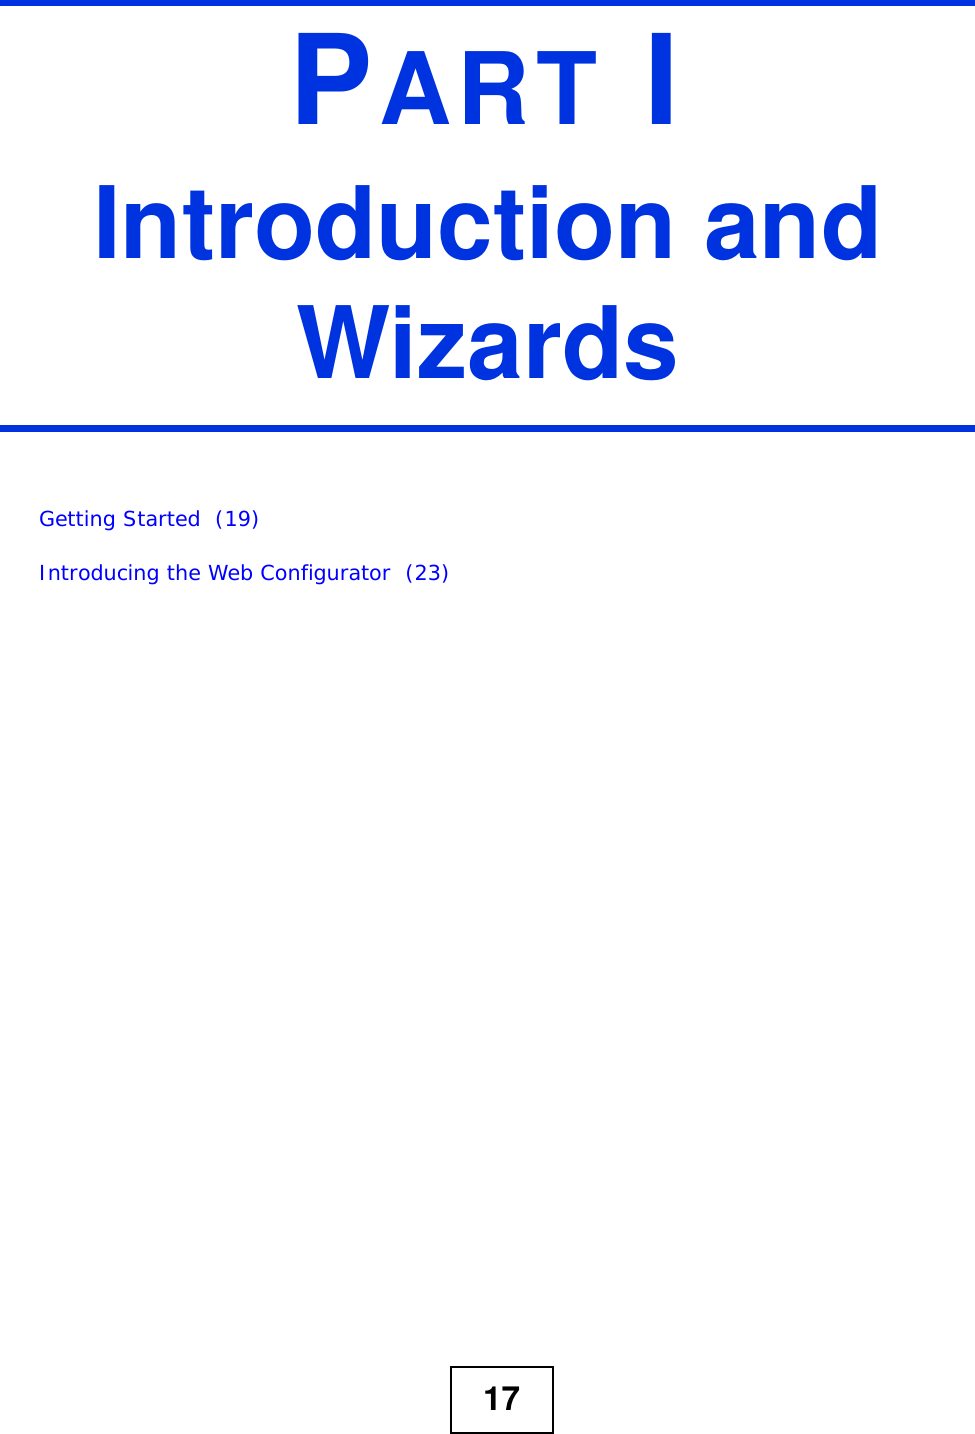 17PART IIntroduction and WizardsGetting Started  (19)Introducing the Web Configurator  (23)